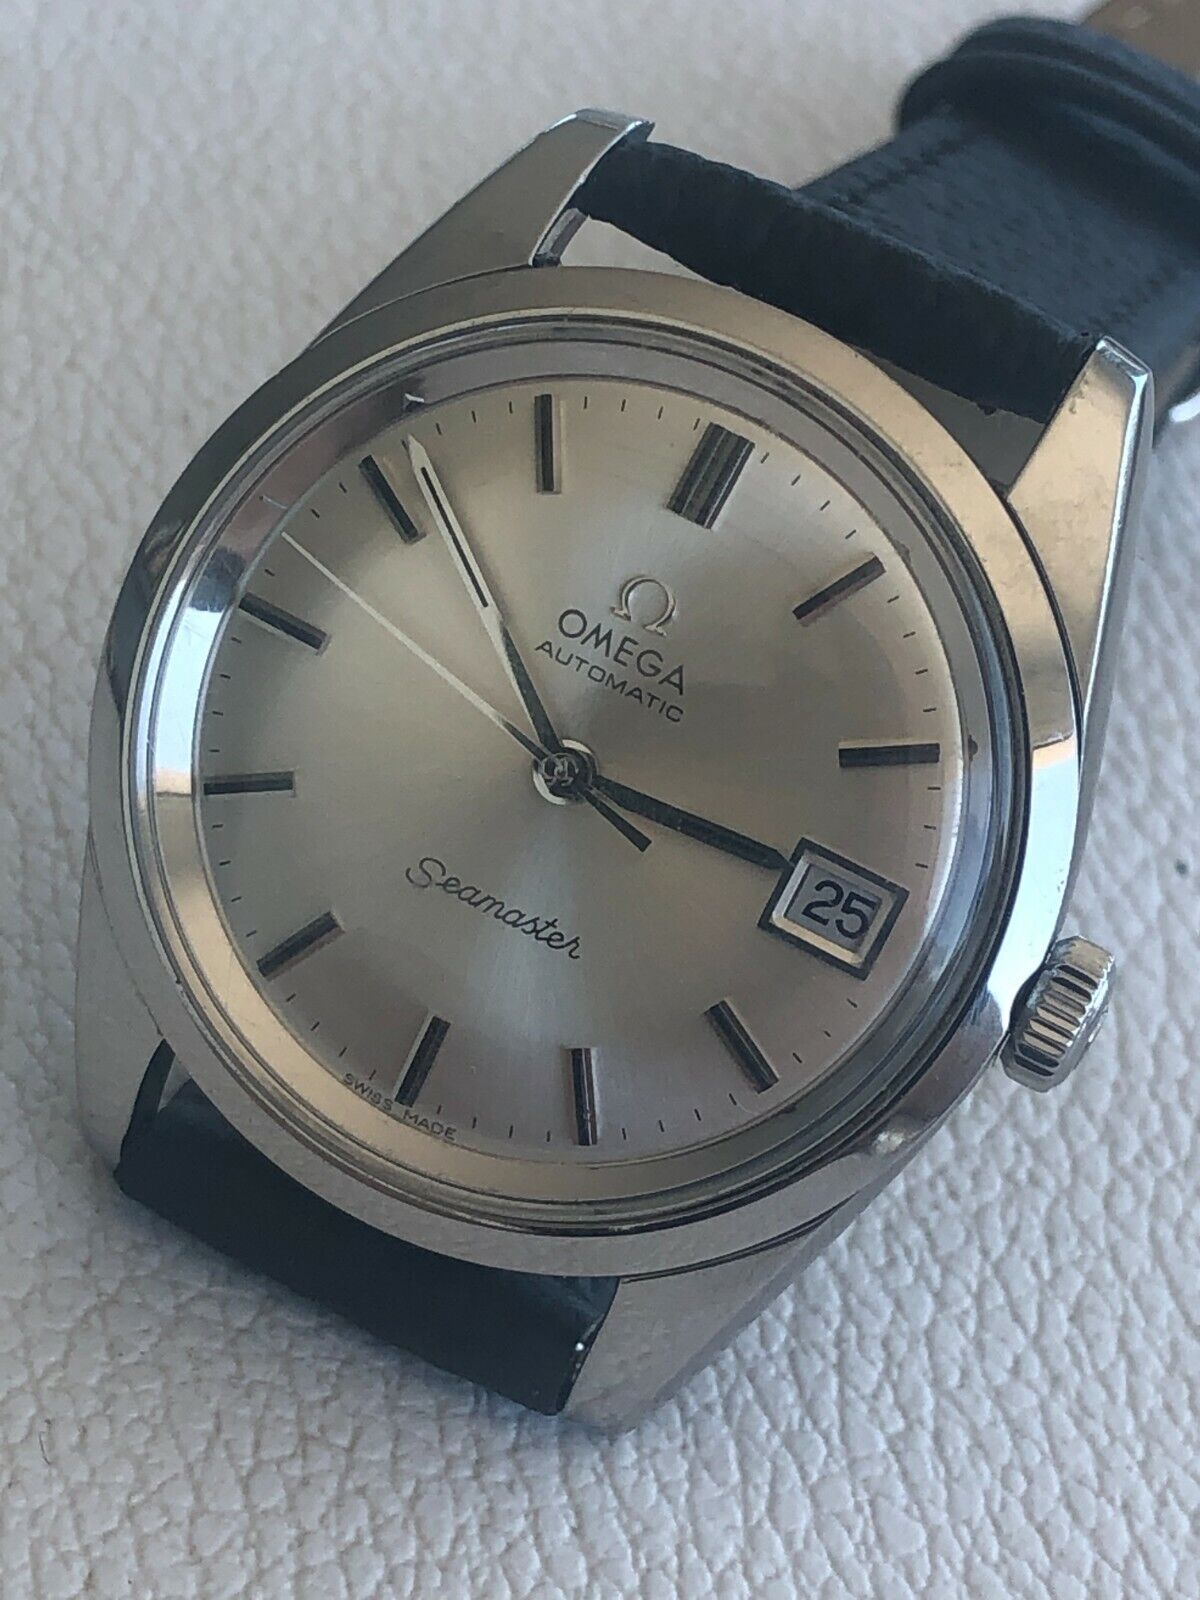 Omega Seamaster 166010 Stainless Steel Mint Condition Just Serviced